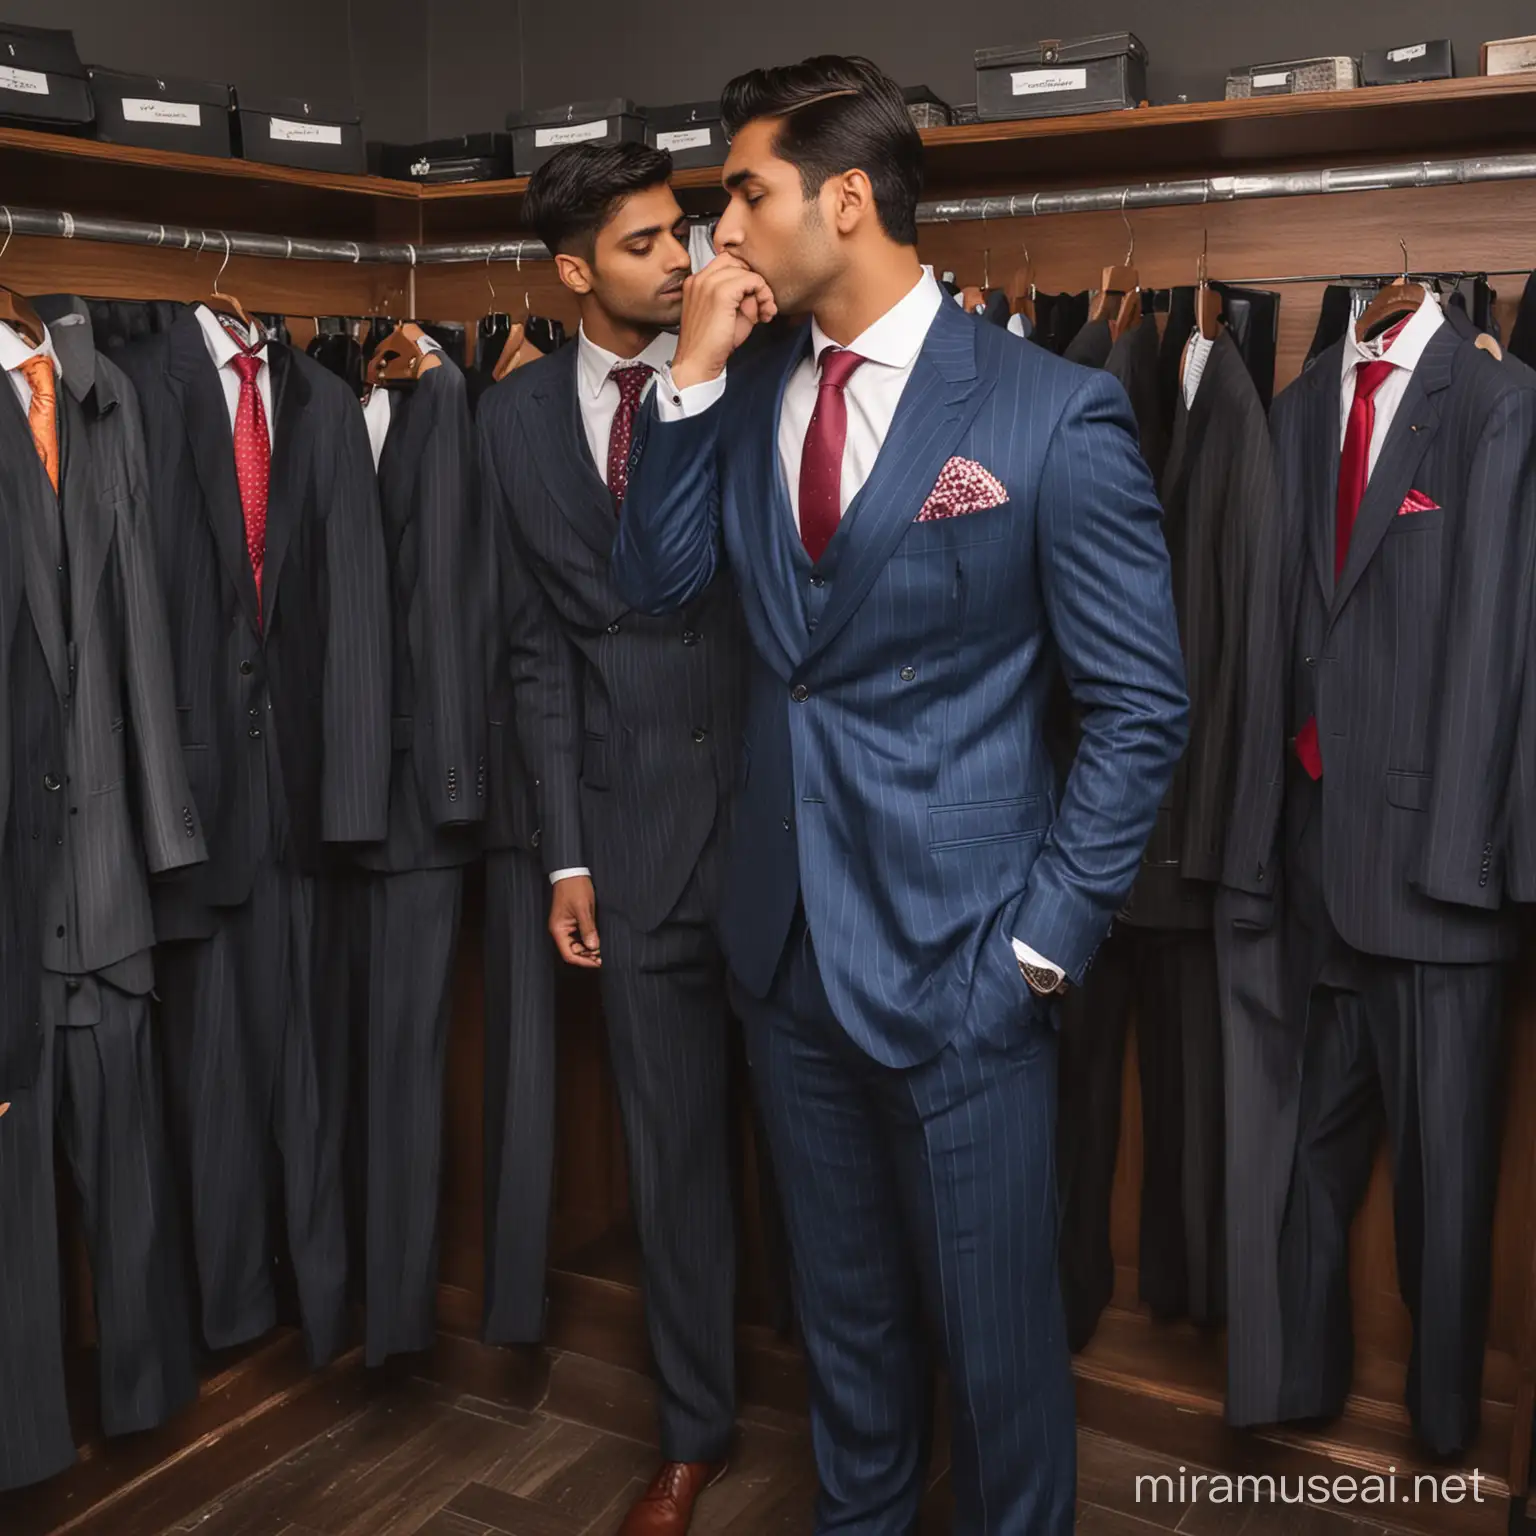 Indian Men Embracing in a Stylish Closet Setting